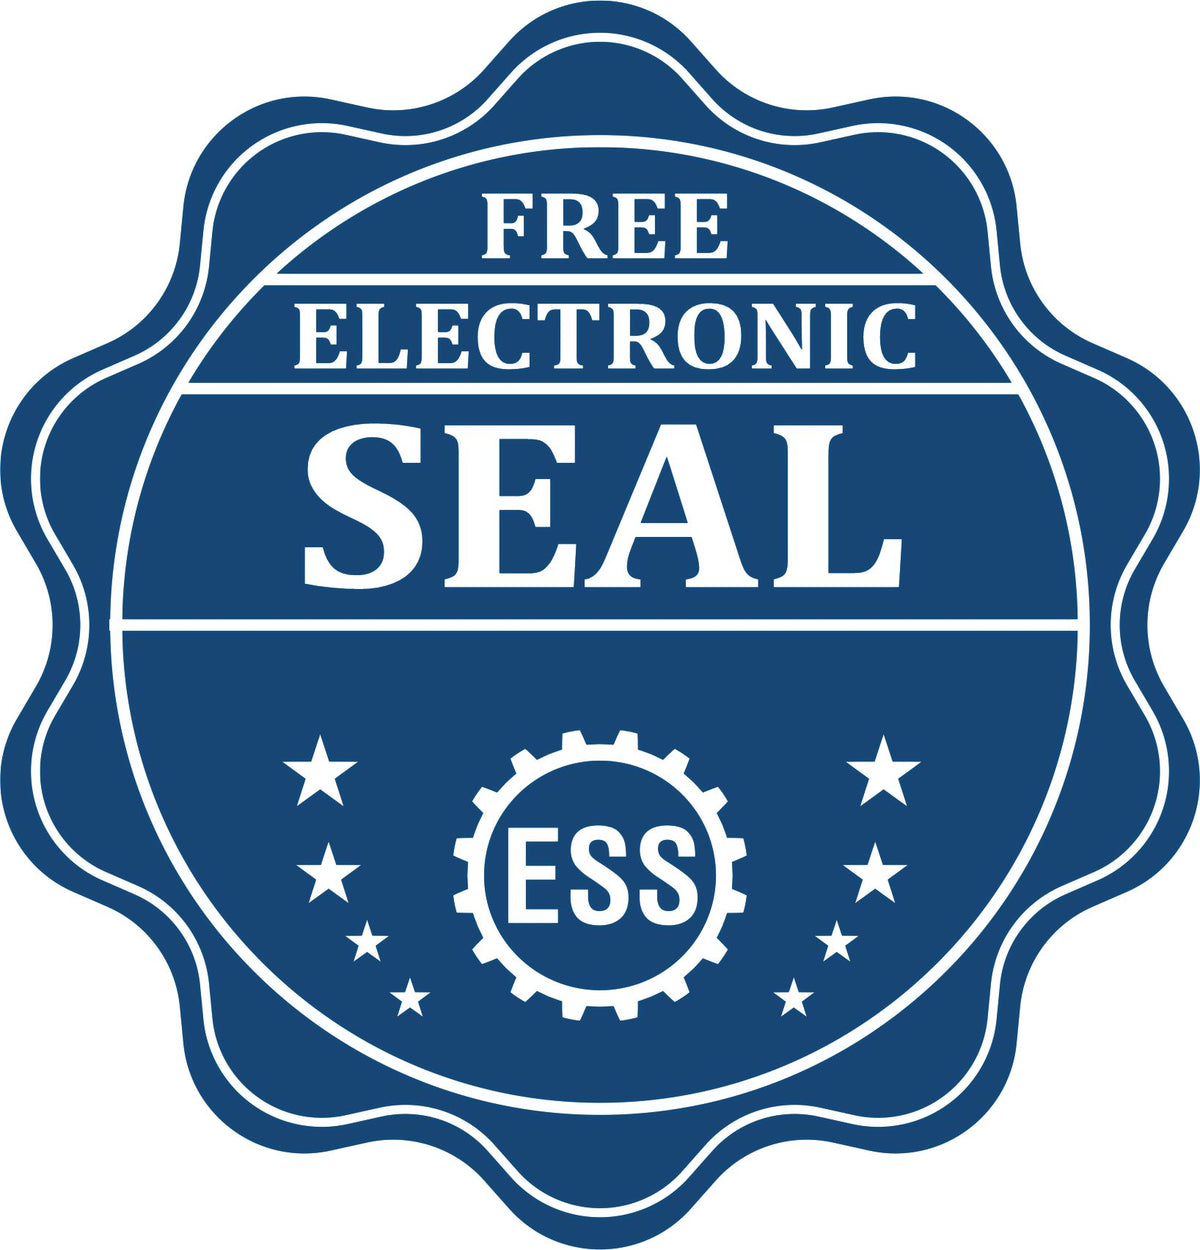 A badge showing a free electronic seal for the State of Louisiana Extended Long Reach Geologist Seal with stars and the ESS gear on the emblem.